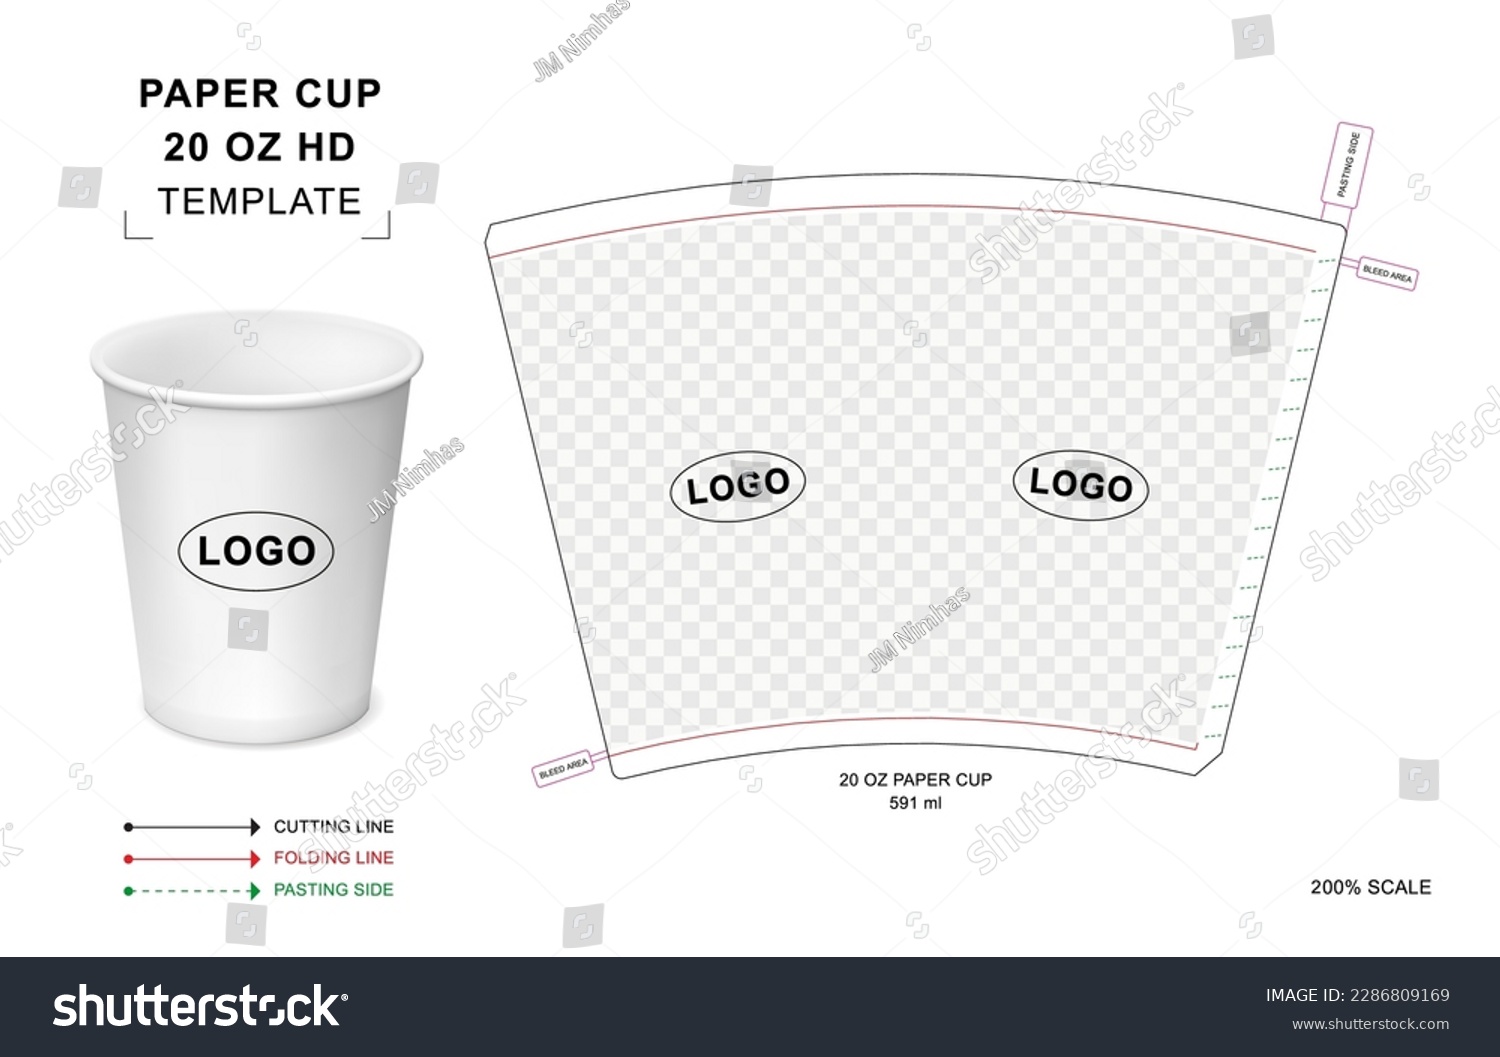 SVG of Paper cup die cut template for 20 oz HD svg